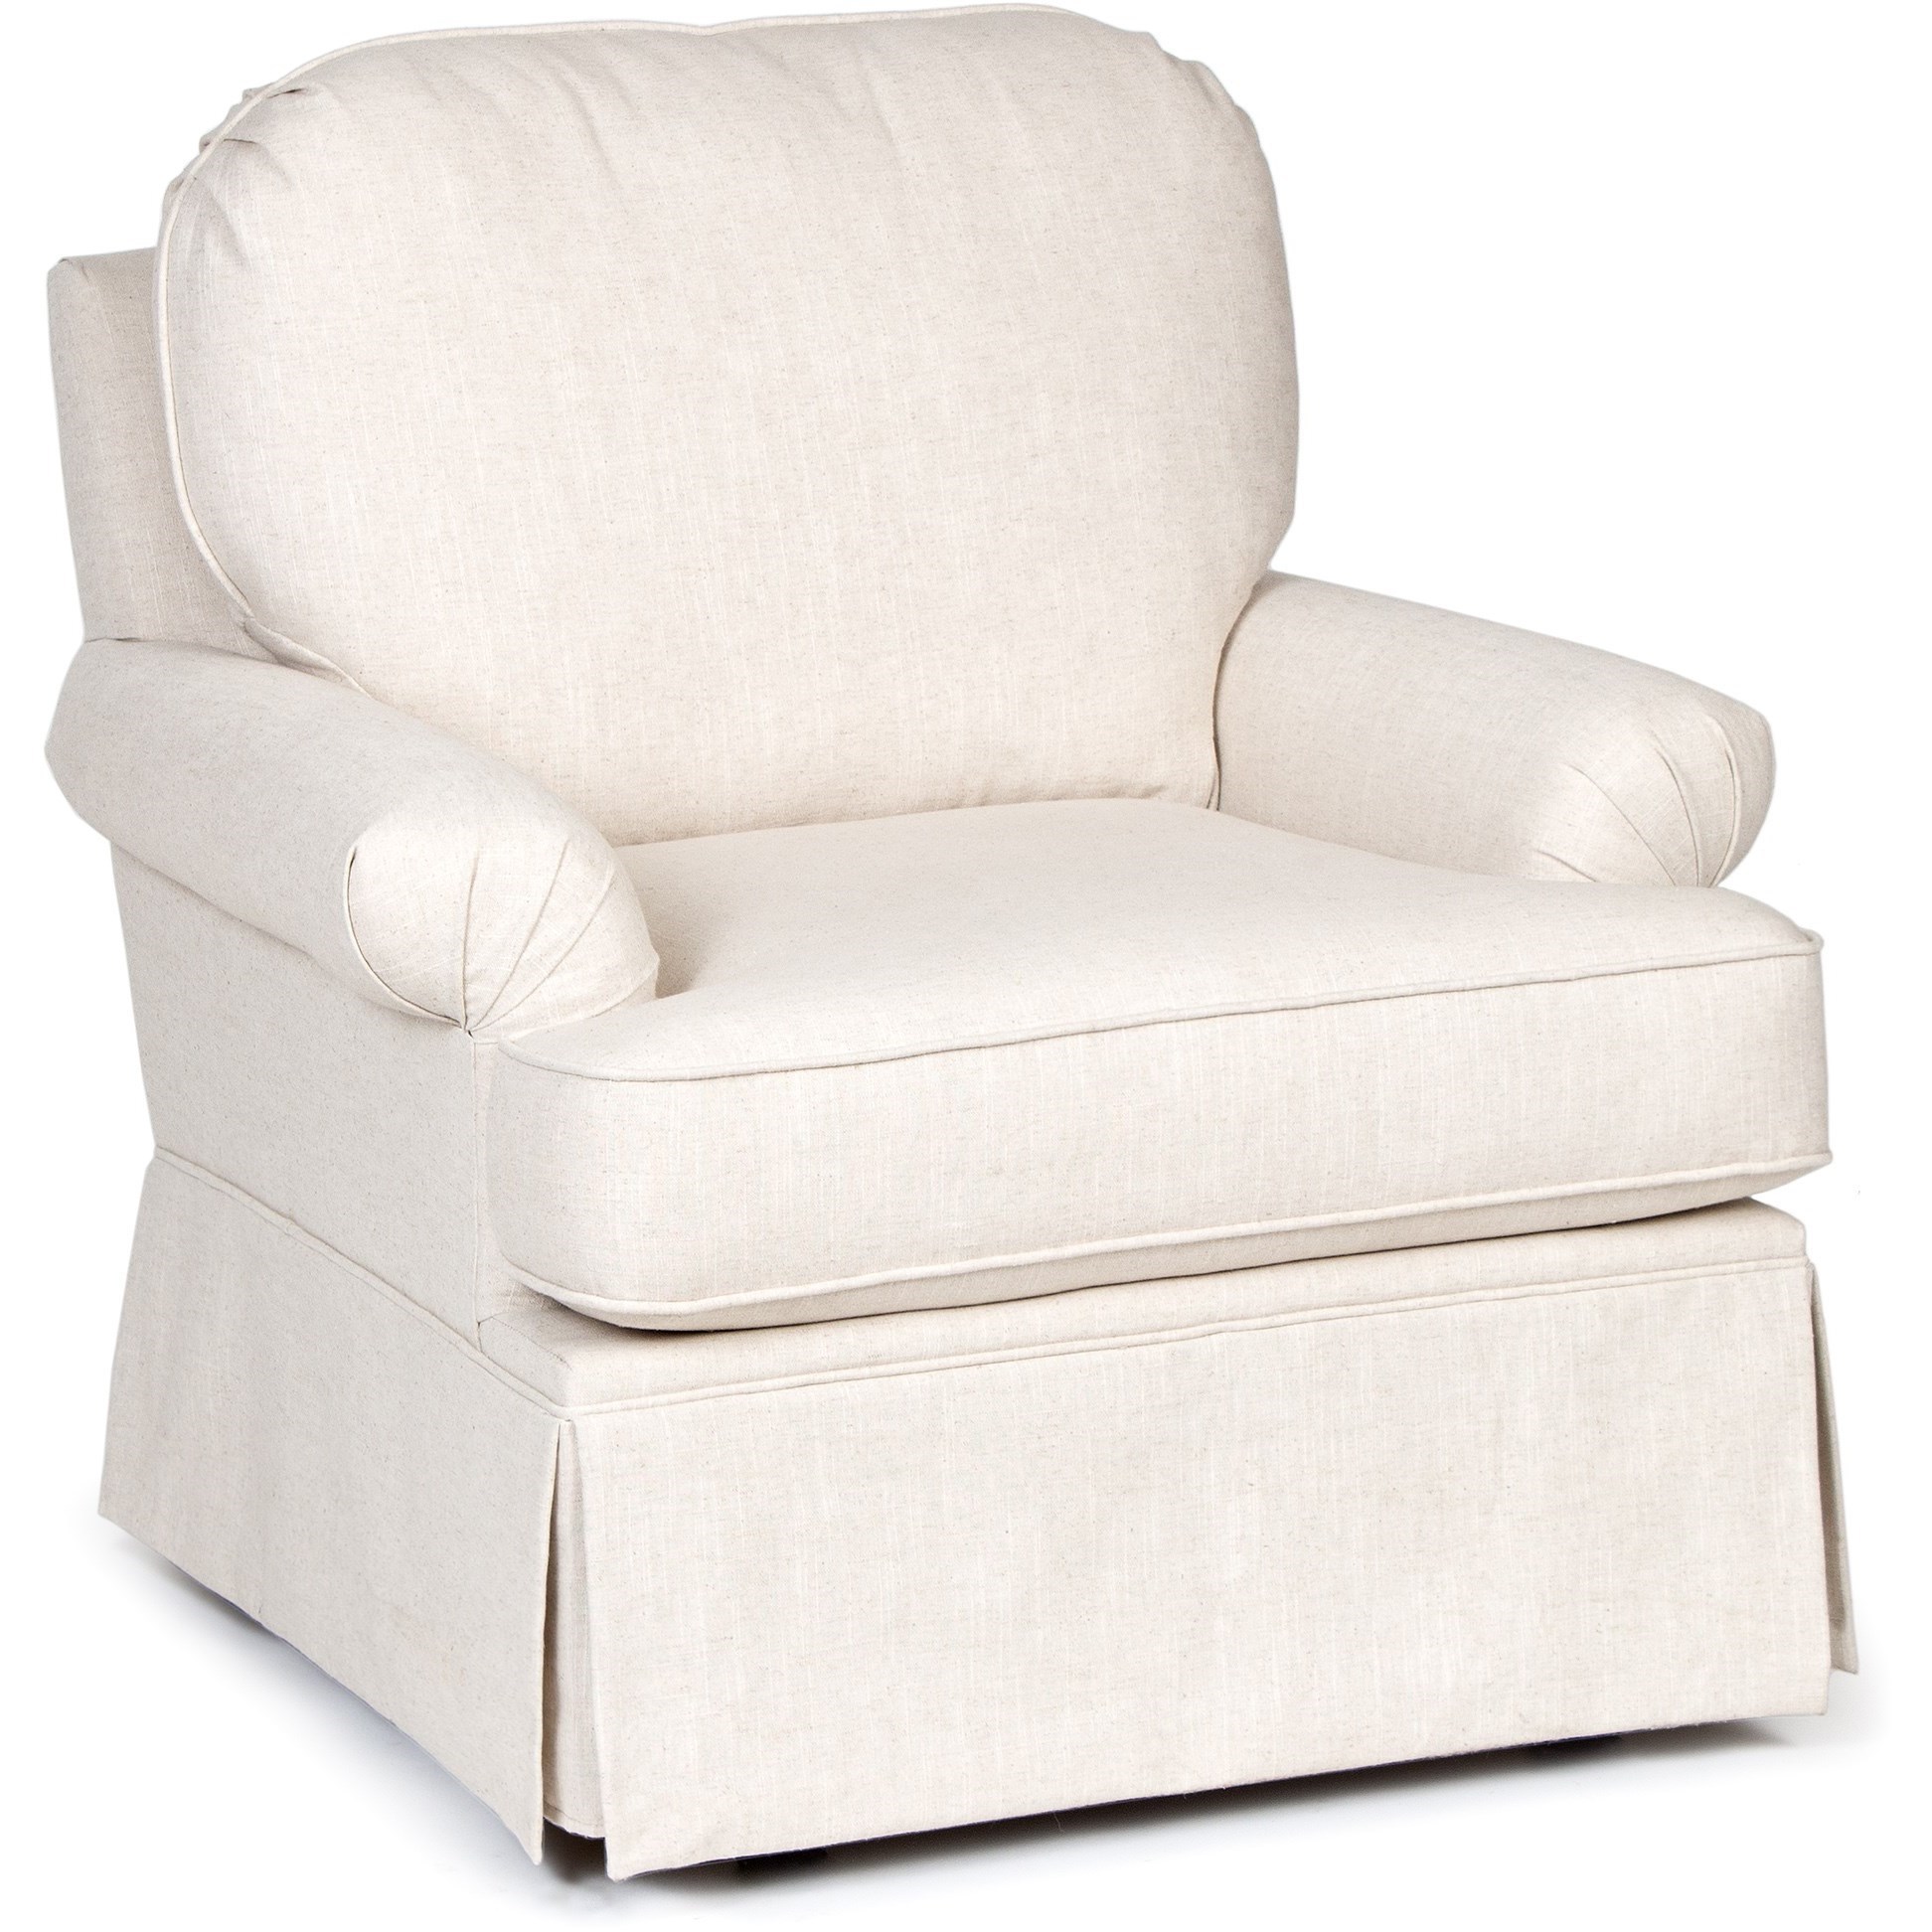 Chairs America Accent Chairs and Ottomans Swivel Glider with Skirted Base